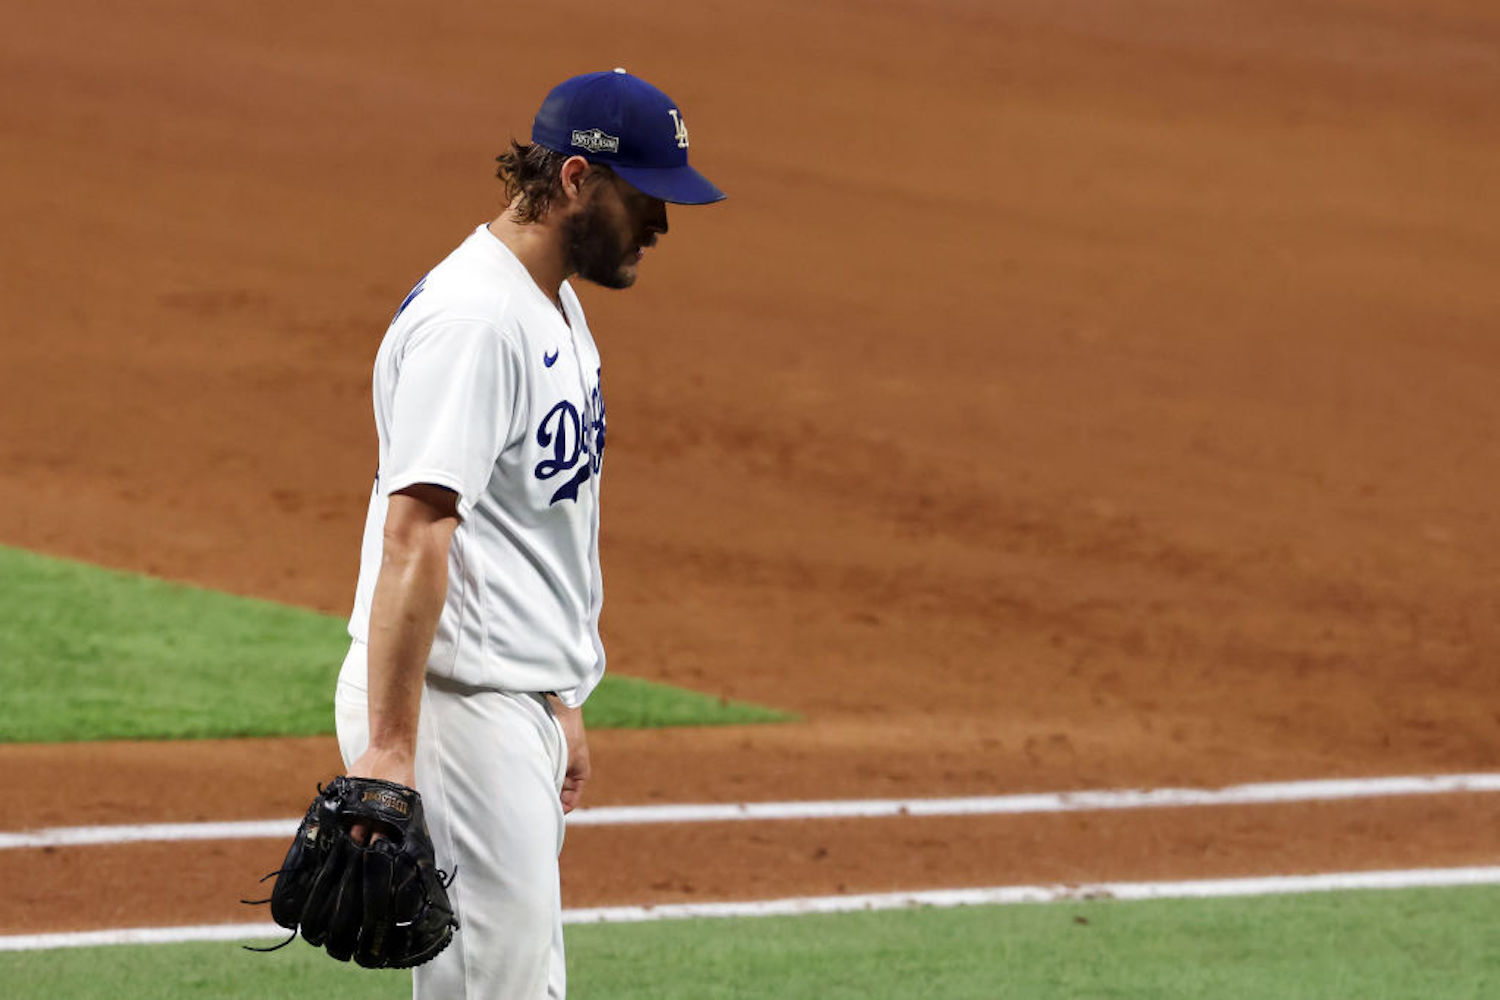 The LA Dodgers are in trouble in the NLCS after scratching Clayton Kershaw from his scheduled start in Game 2.